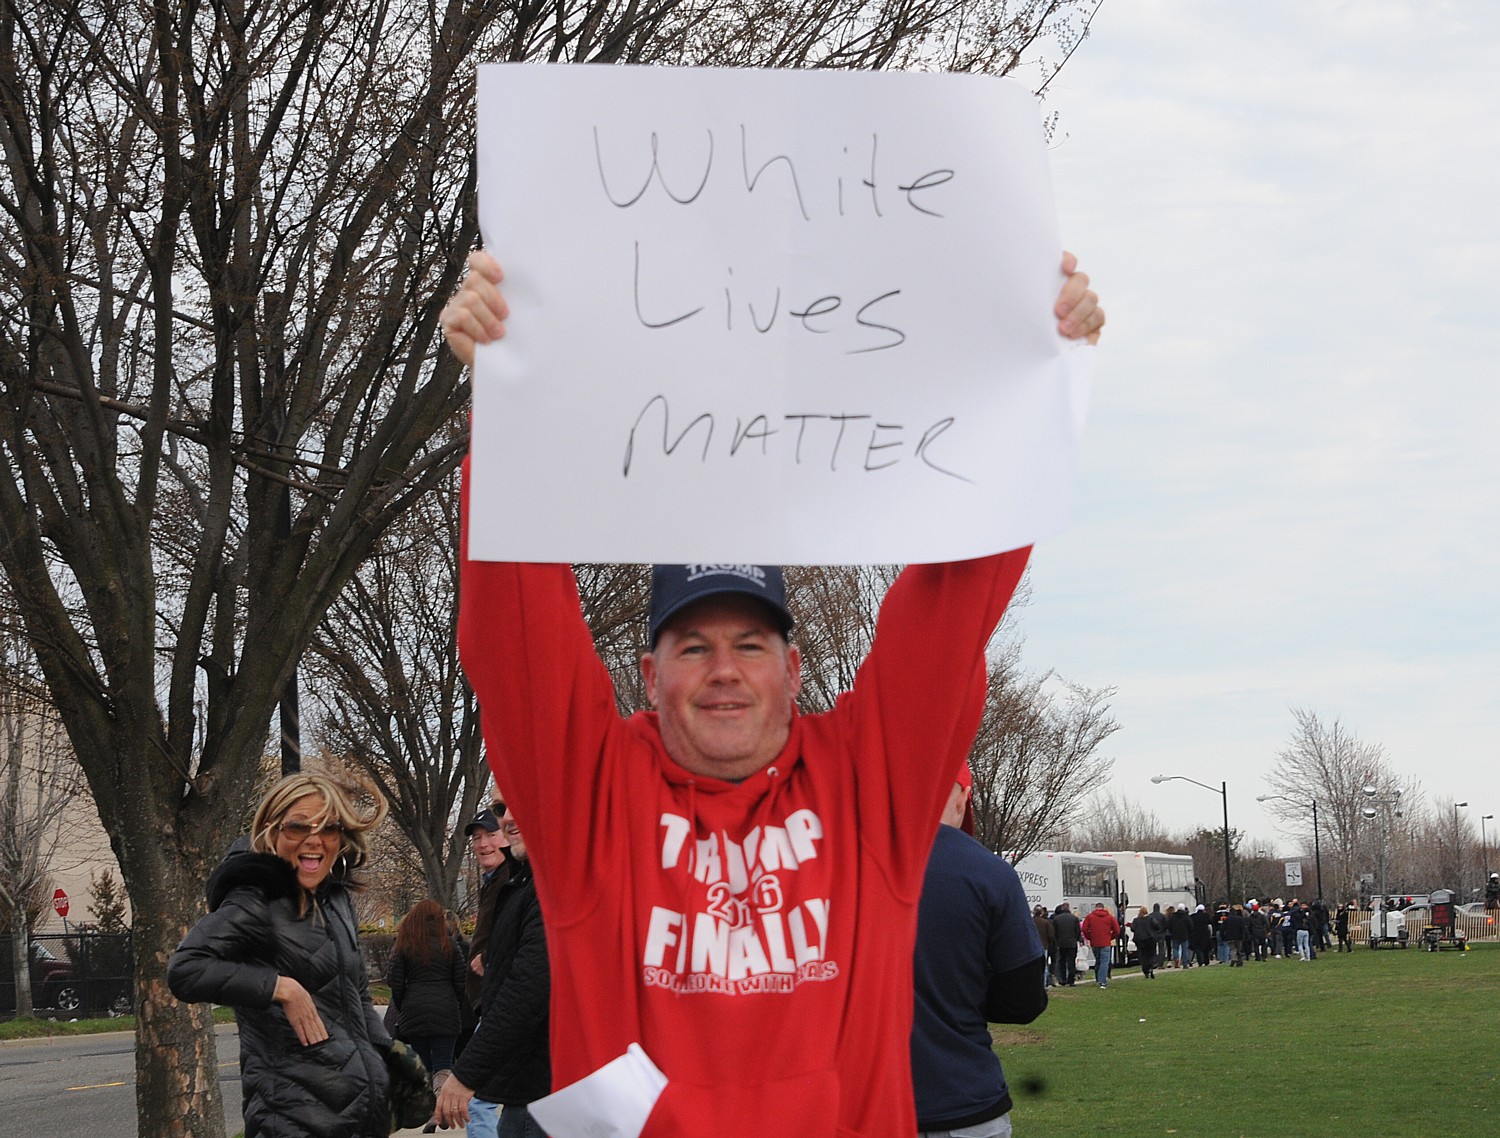 Supporter at Donald Trump rally, Bethpage, Long Island, NY, holds sign, "White Lives Matter" © 2016 Karen Rubin/news-photos-features.com